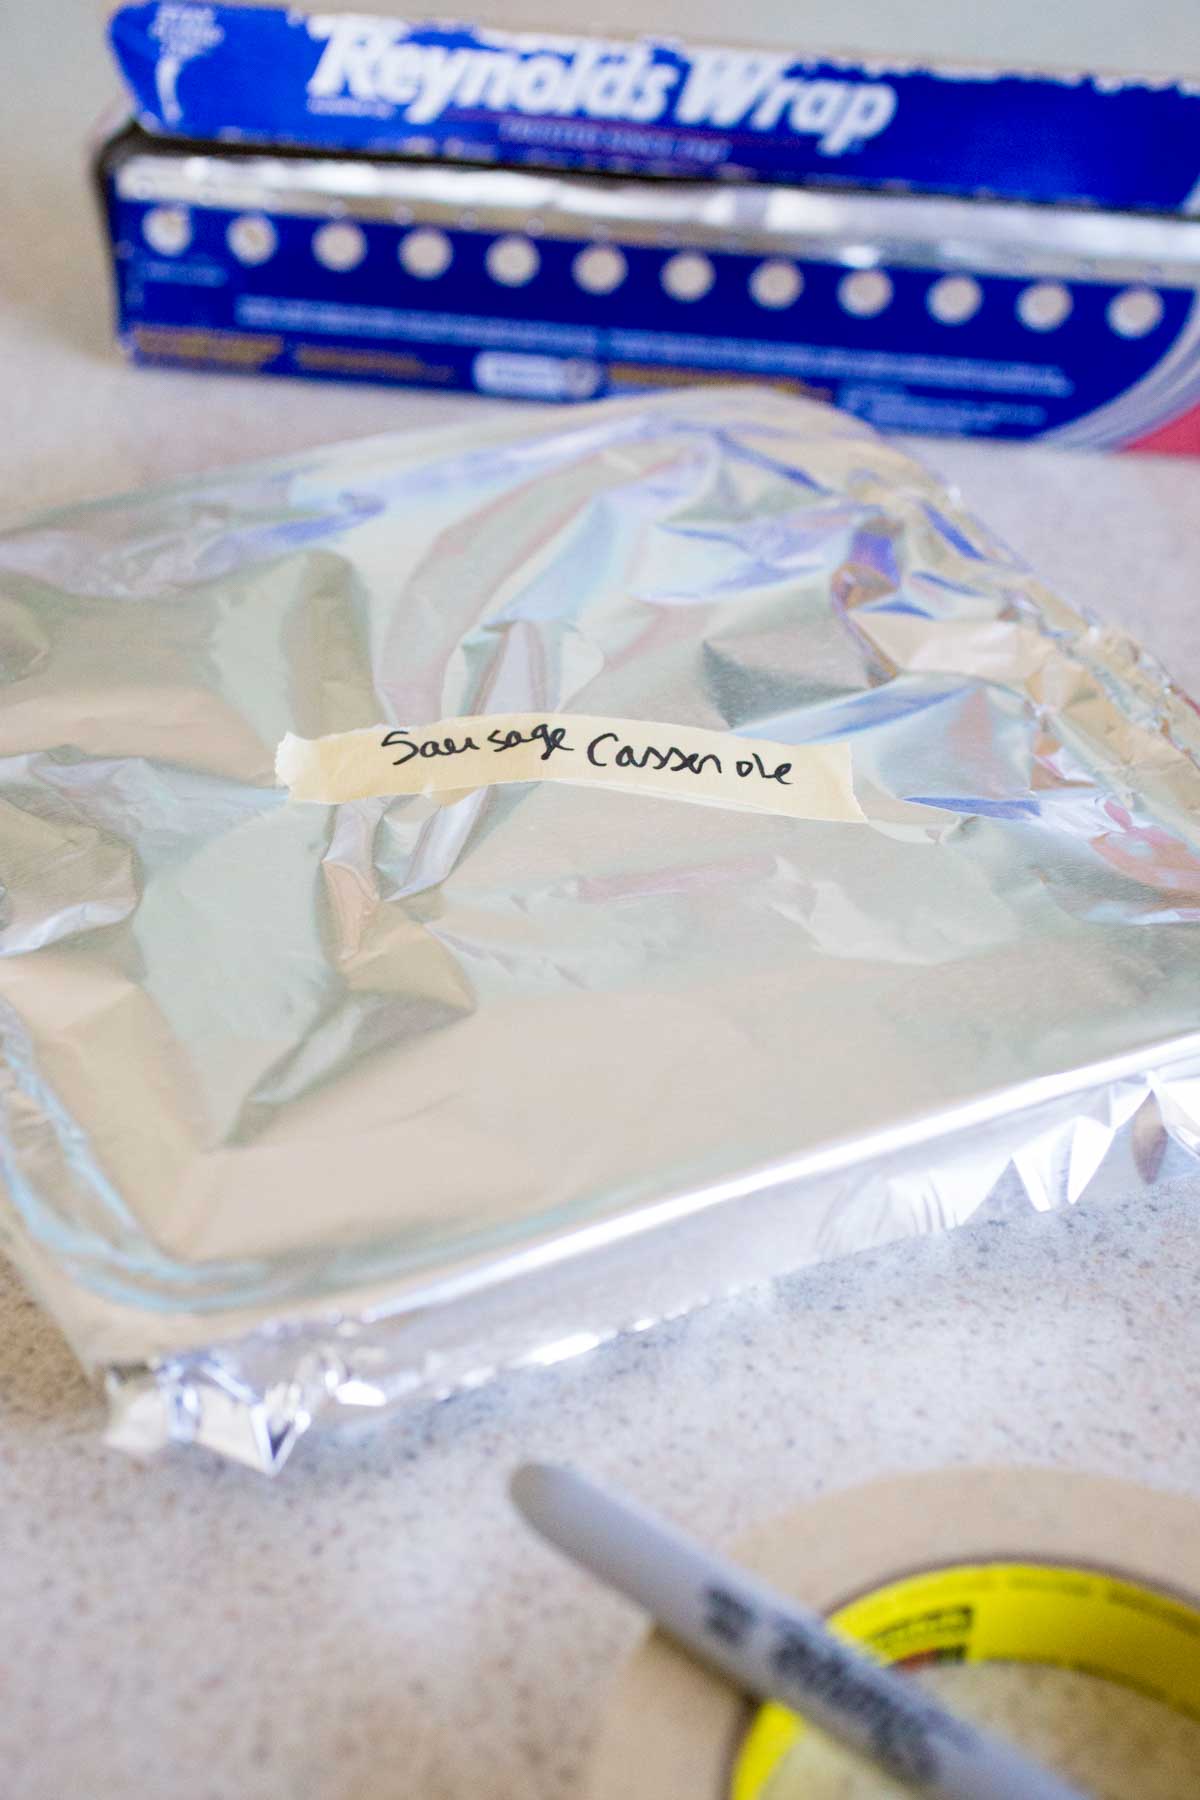 The italian sausage casserole has been wrapped in aluminum foil for the freezer.